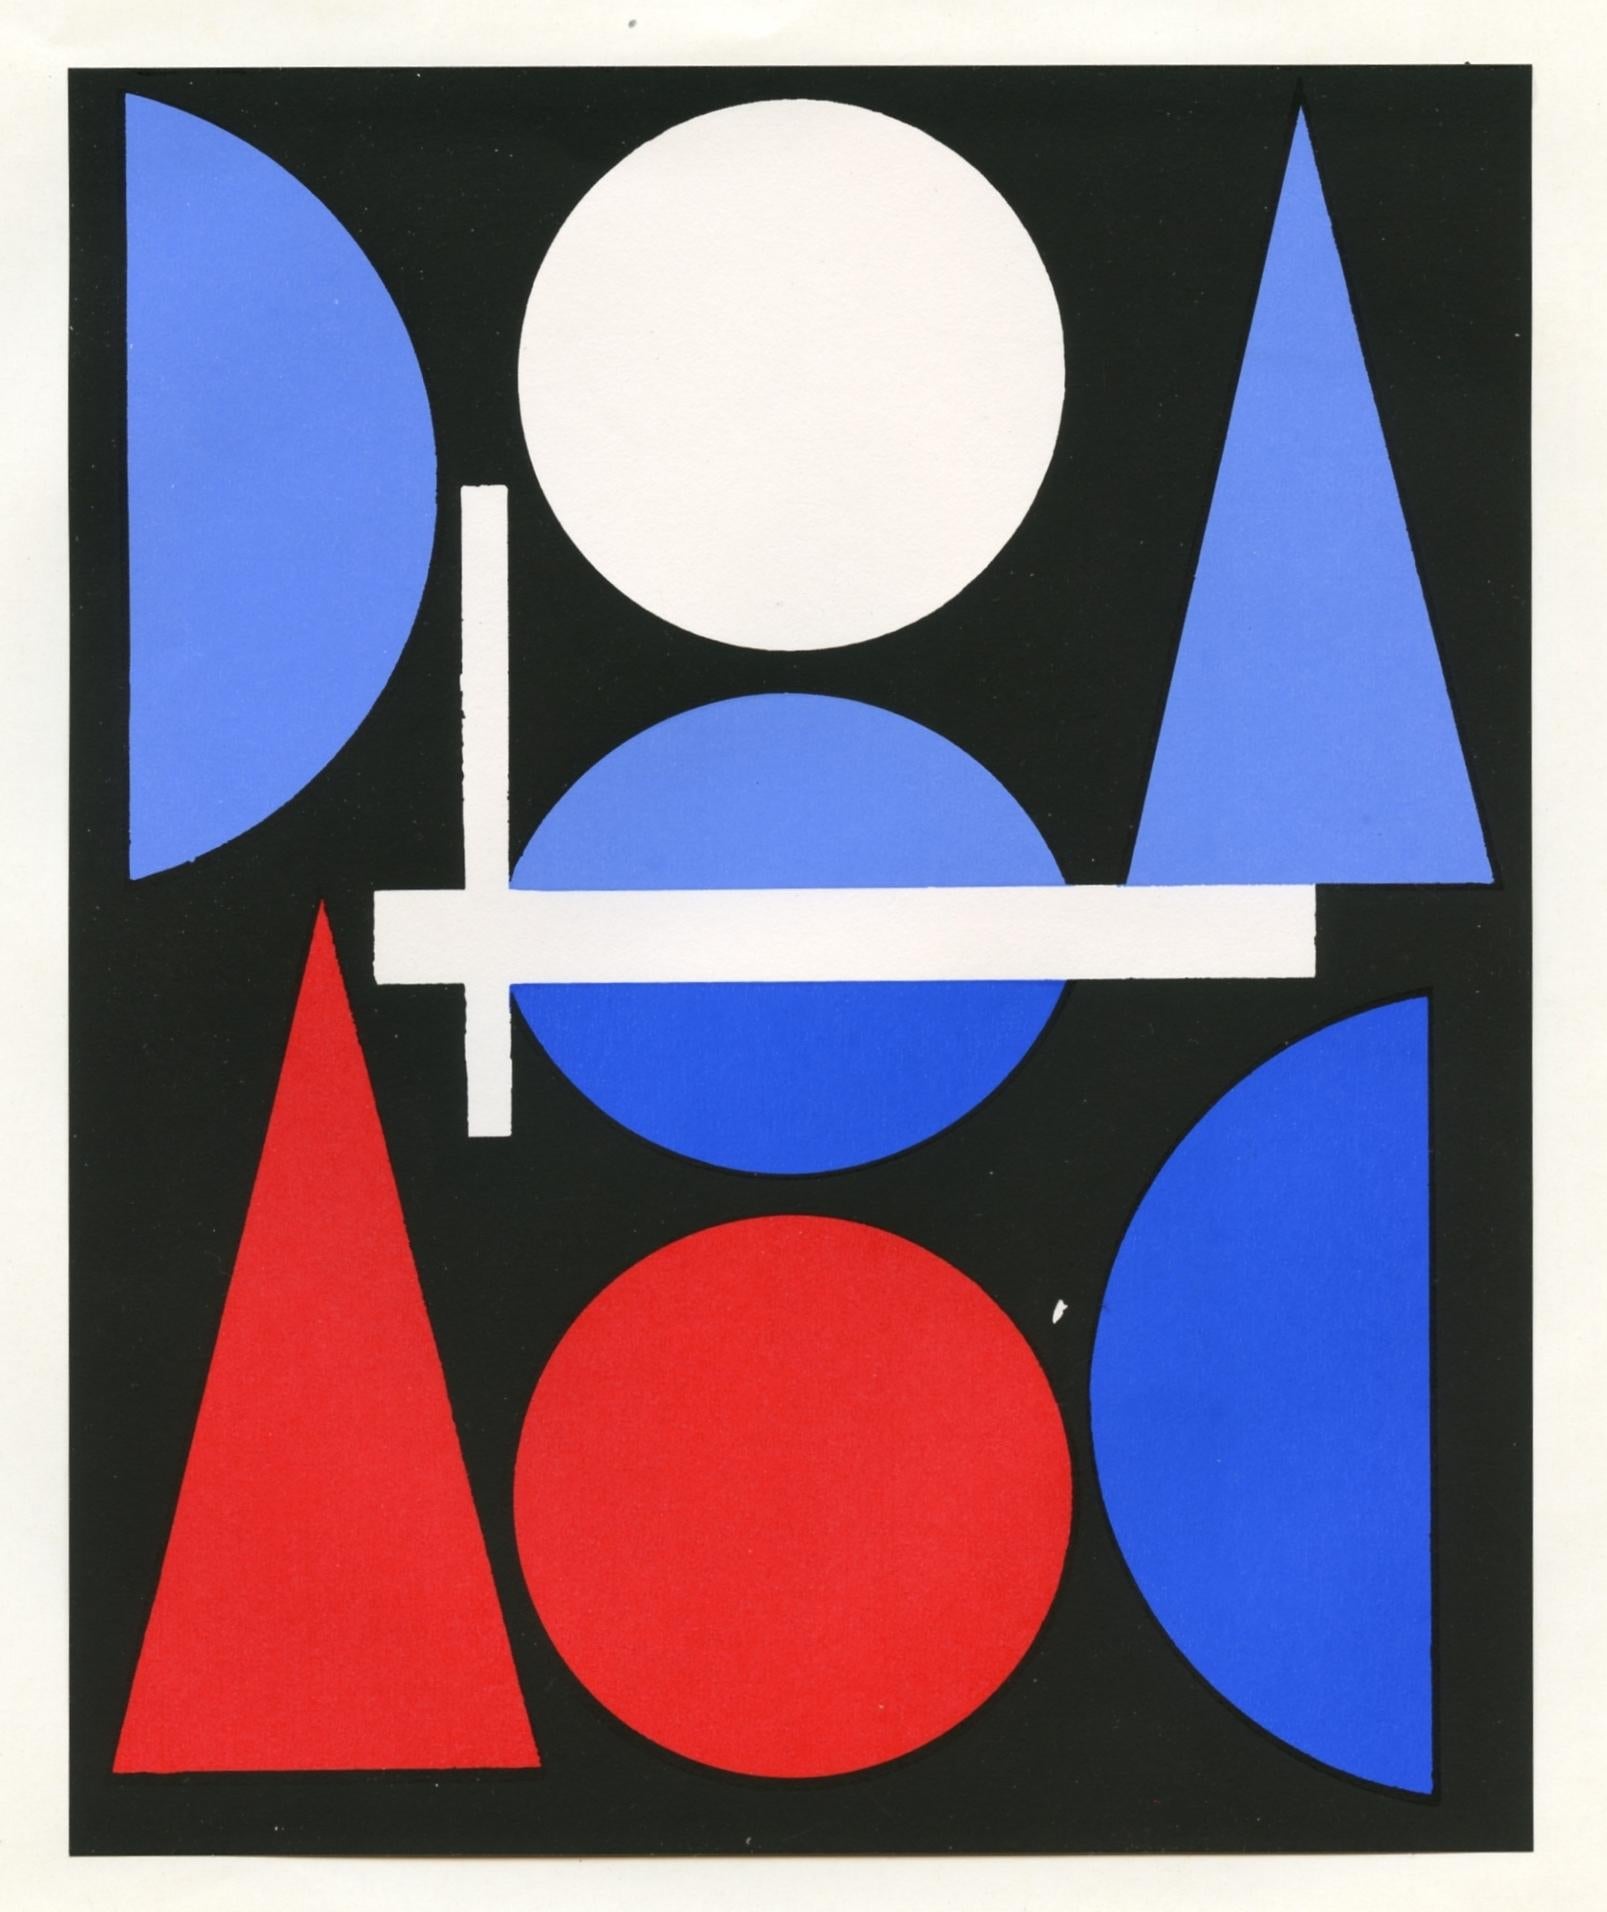 Medium: serigraph / silkscreen. Printed in 1964 on thin wove paper by Imprimerie Mazarine and published in Paris by Galerie Denise Rene for the rare exhibition catalogue "Hard Edge". This work was attached by the publisher onto a larger support